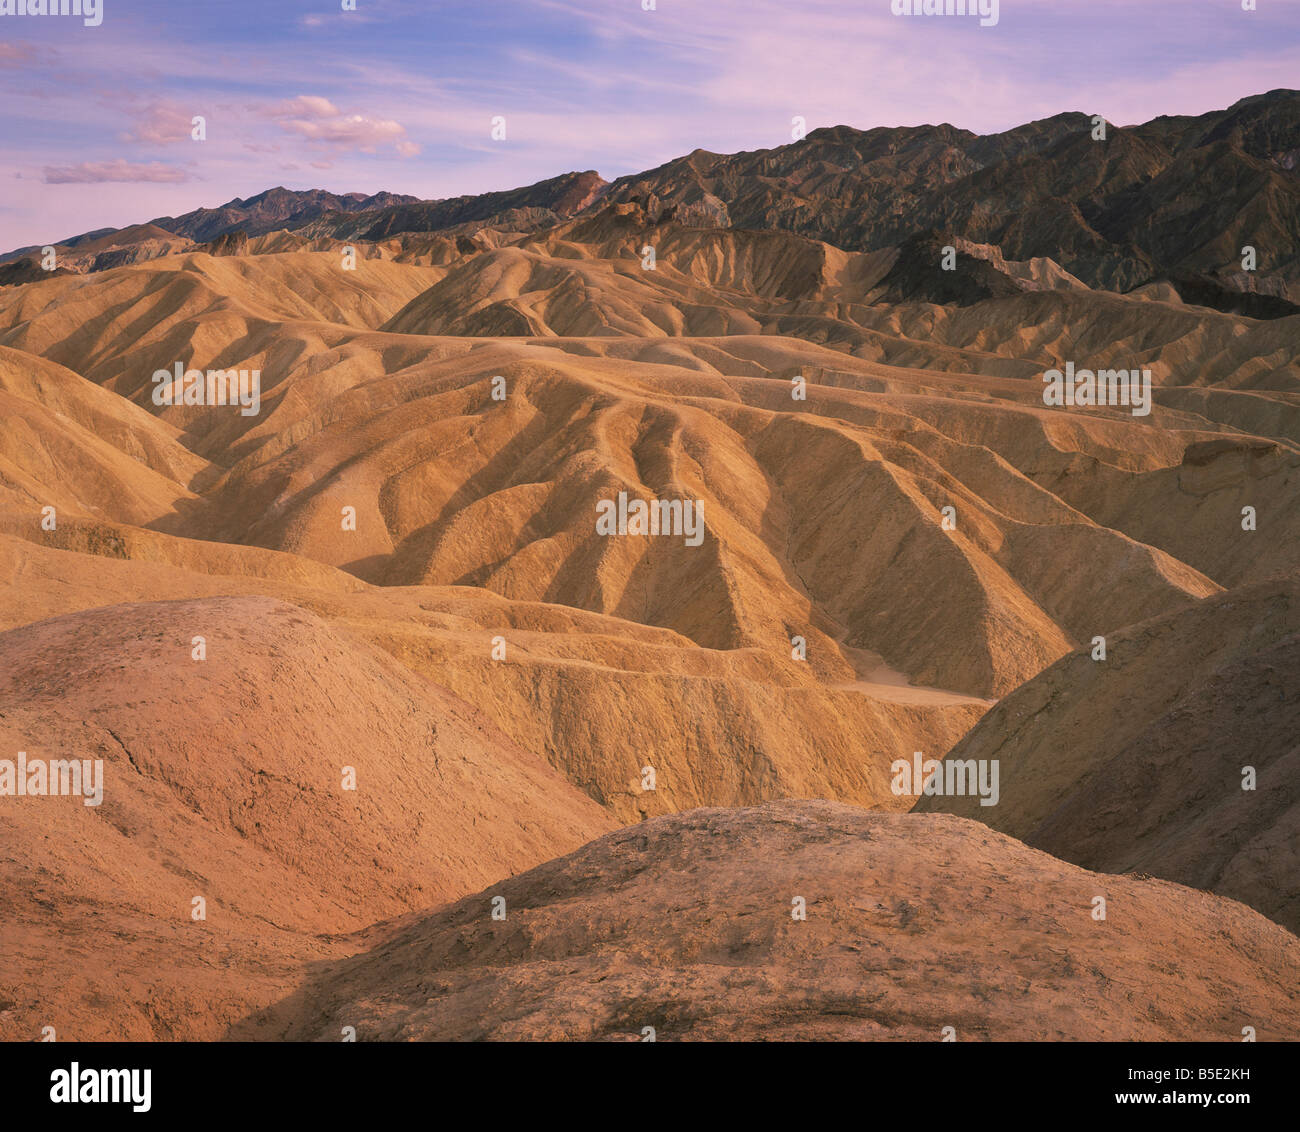 Bare hills and gulleys at Zabriskie Point in the Death Valley National Monument California USA R Rainford Stock Photo